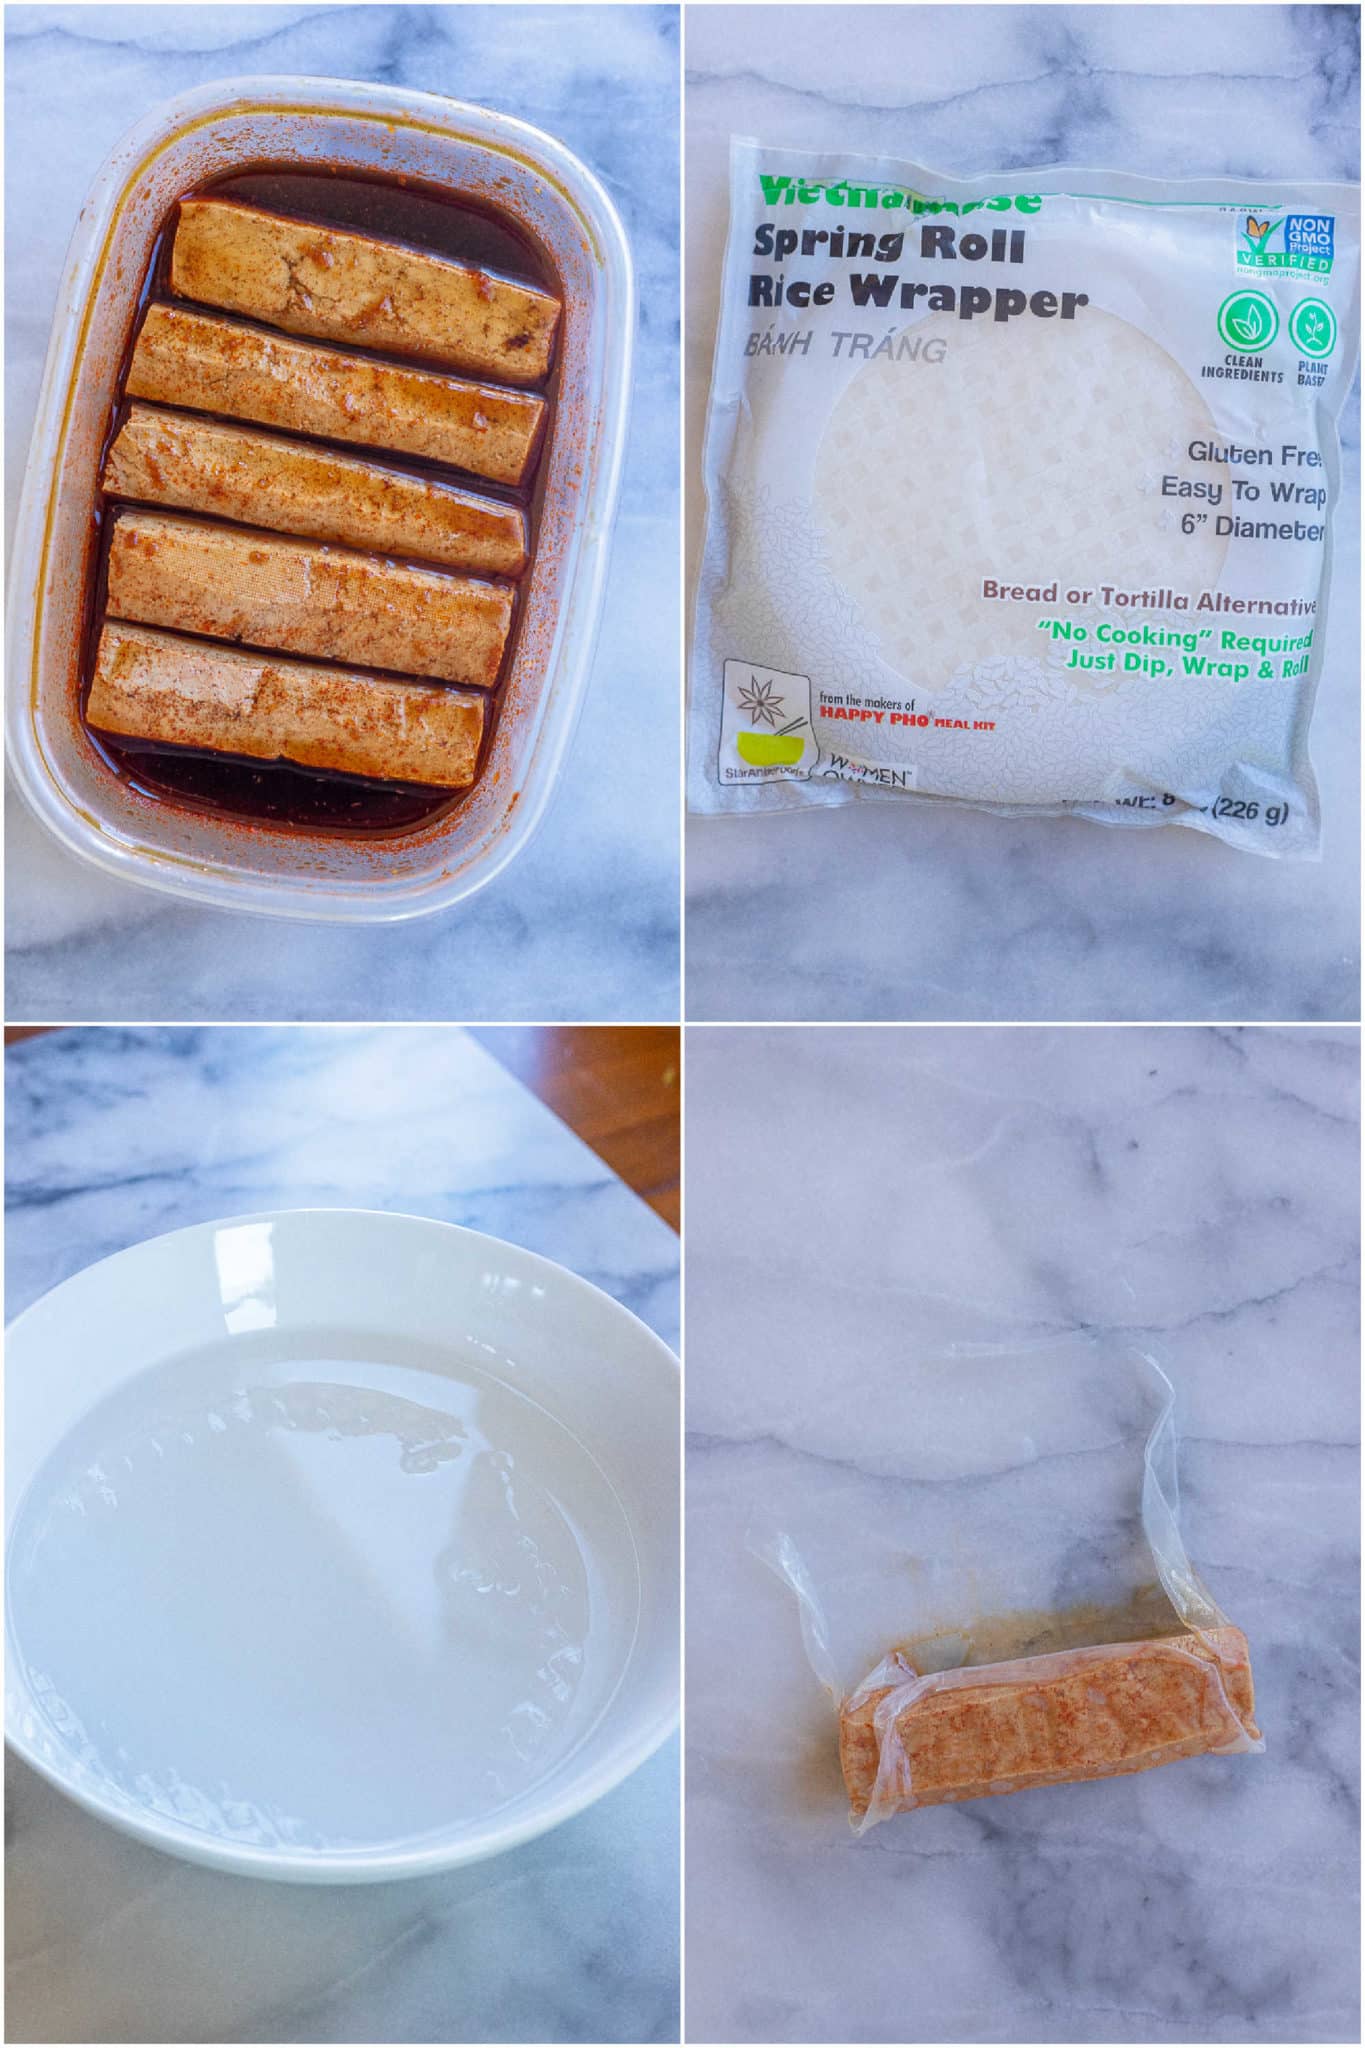 showing how to prepare the tofu with the rice paper to make these homemade vegan hot dogs